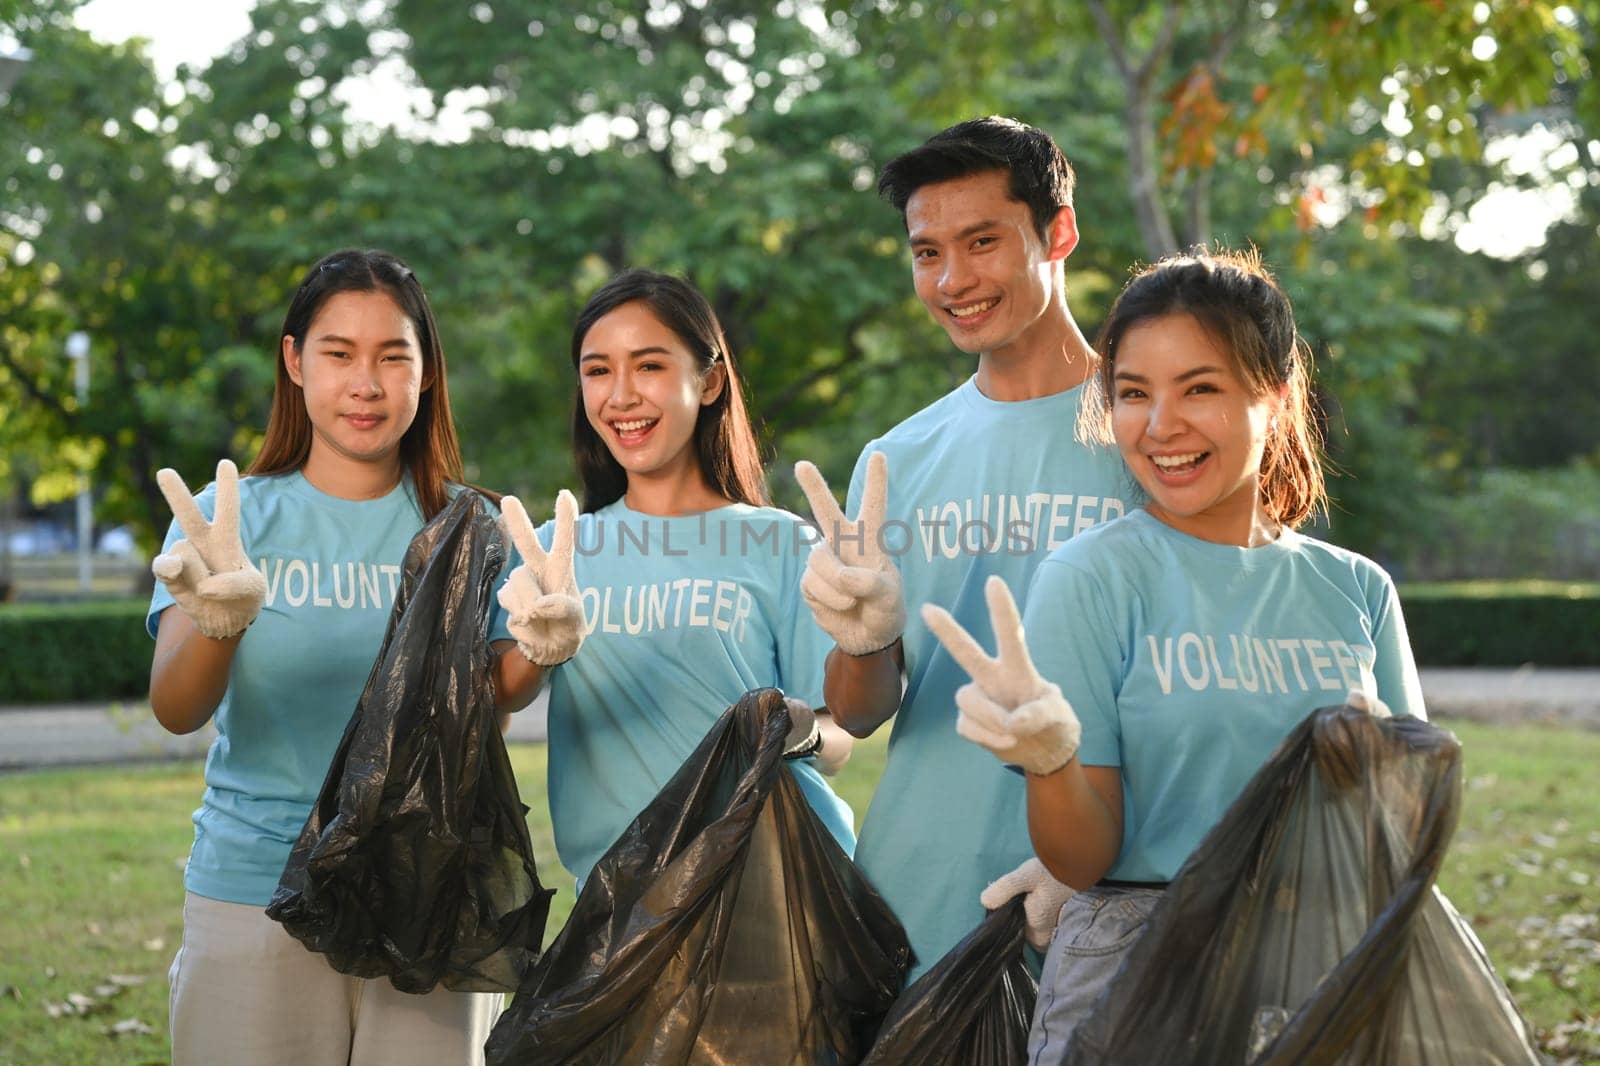 Group of young volunteer collecting trash in the park. Environmental protection and charity concept.